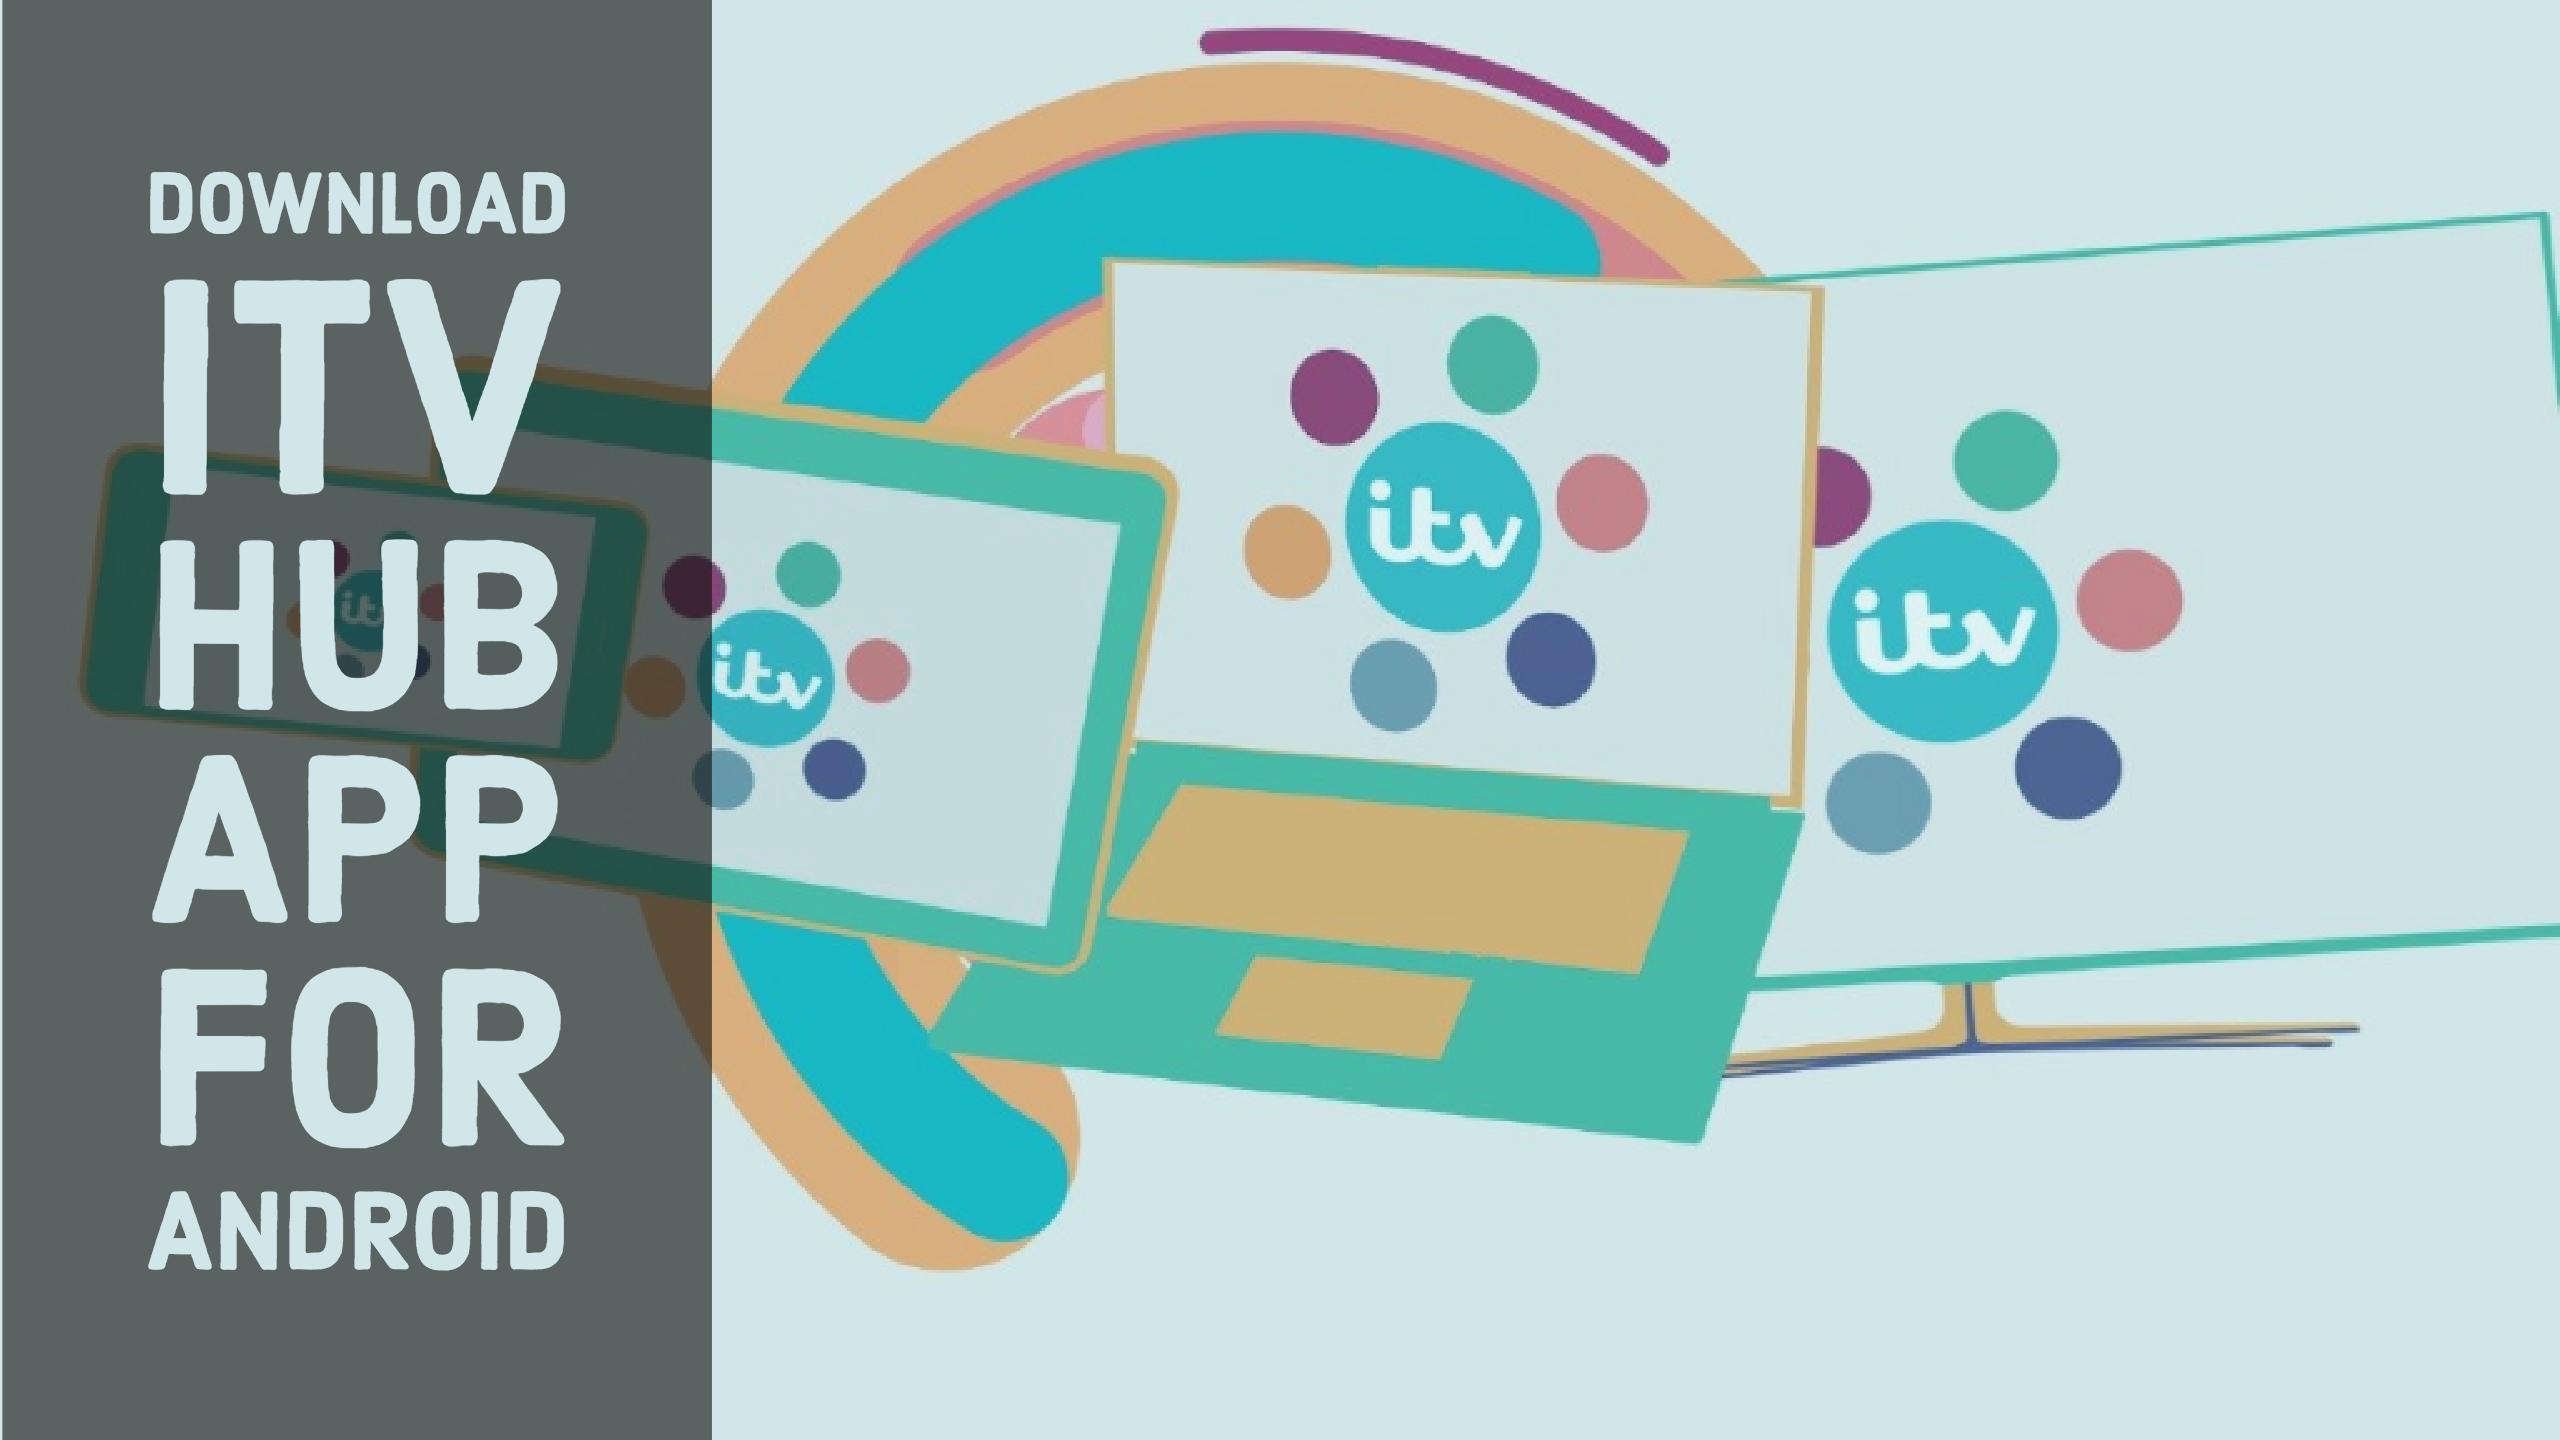 Download ITV Hub App For Android